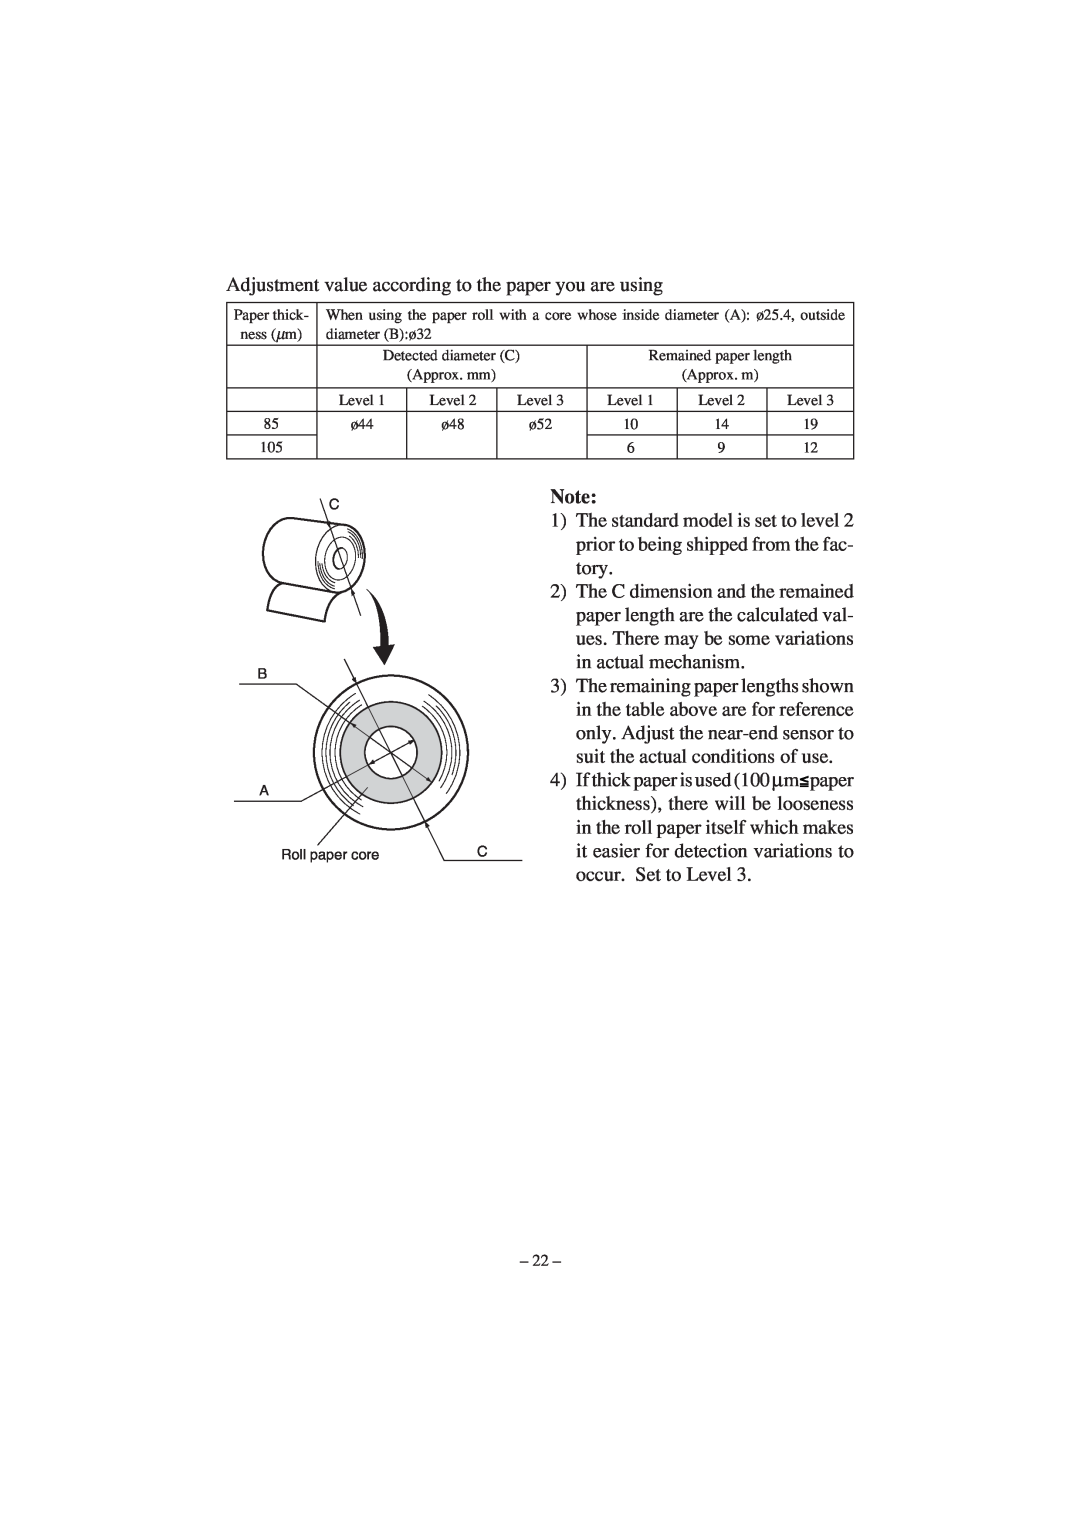 Star Micronics TSP1000 user manual Adjustment value according to the paper you are using 